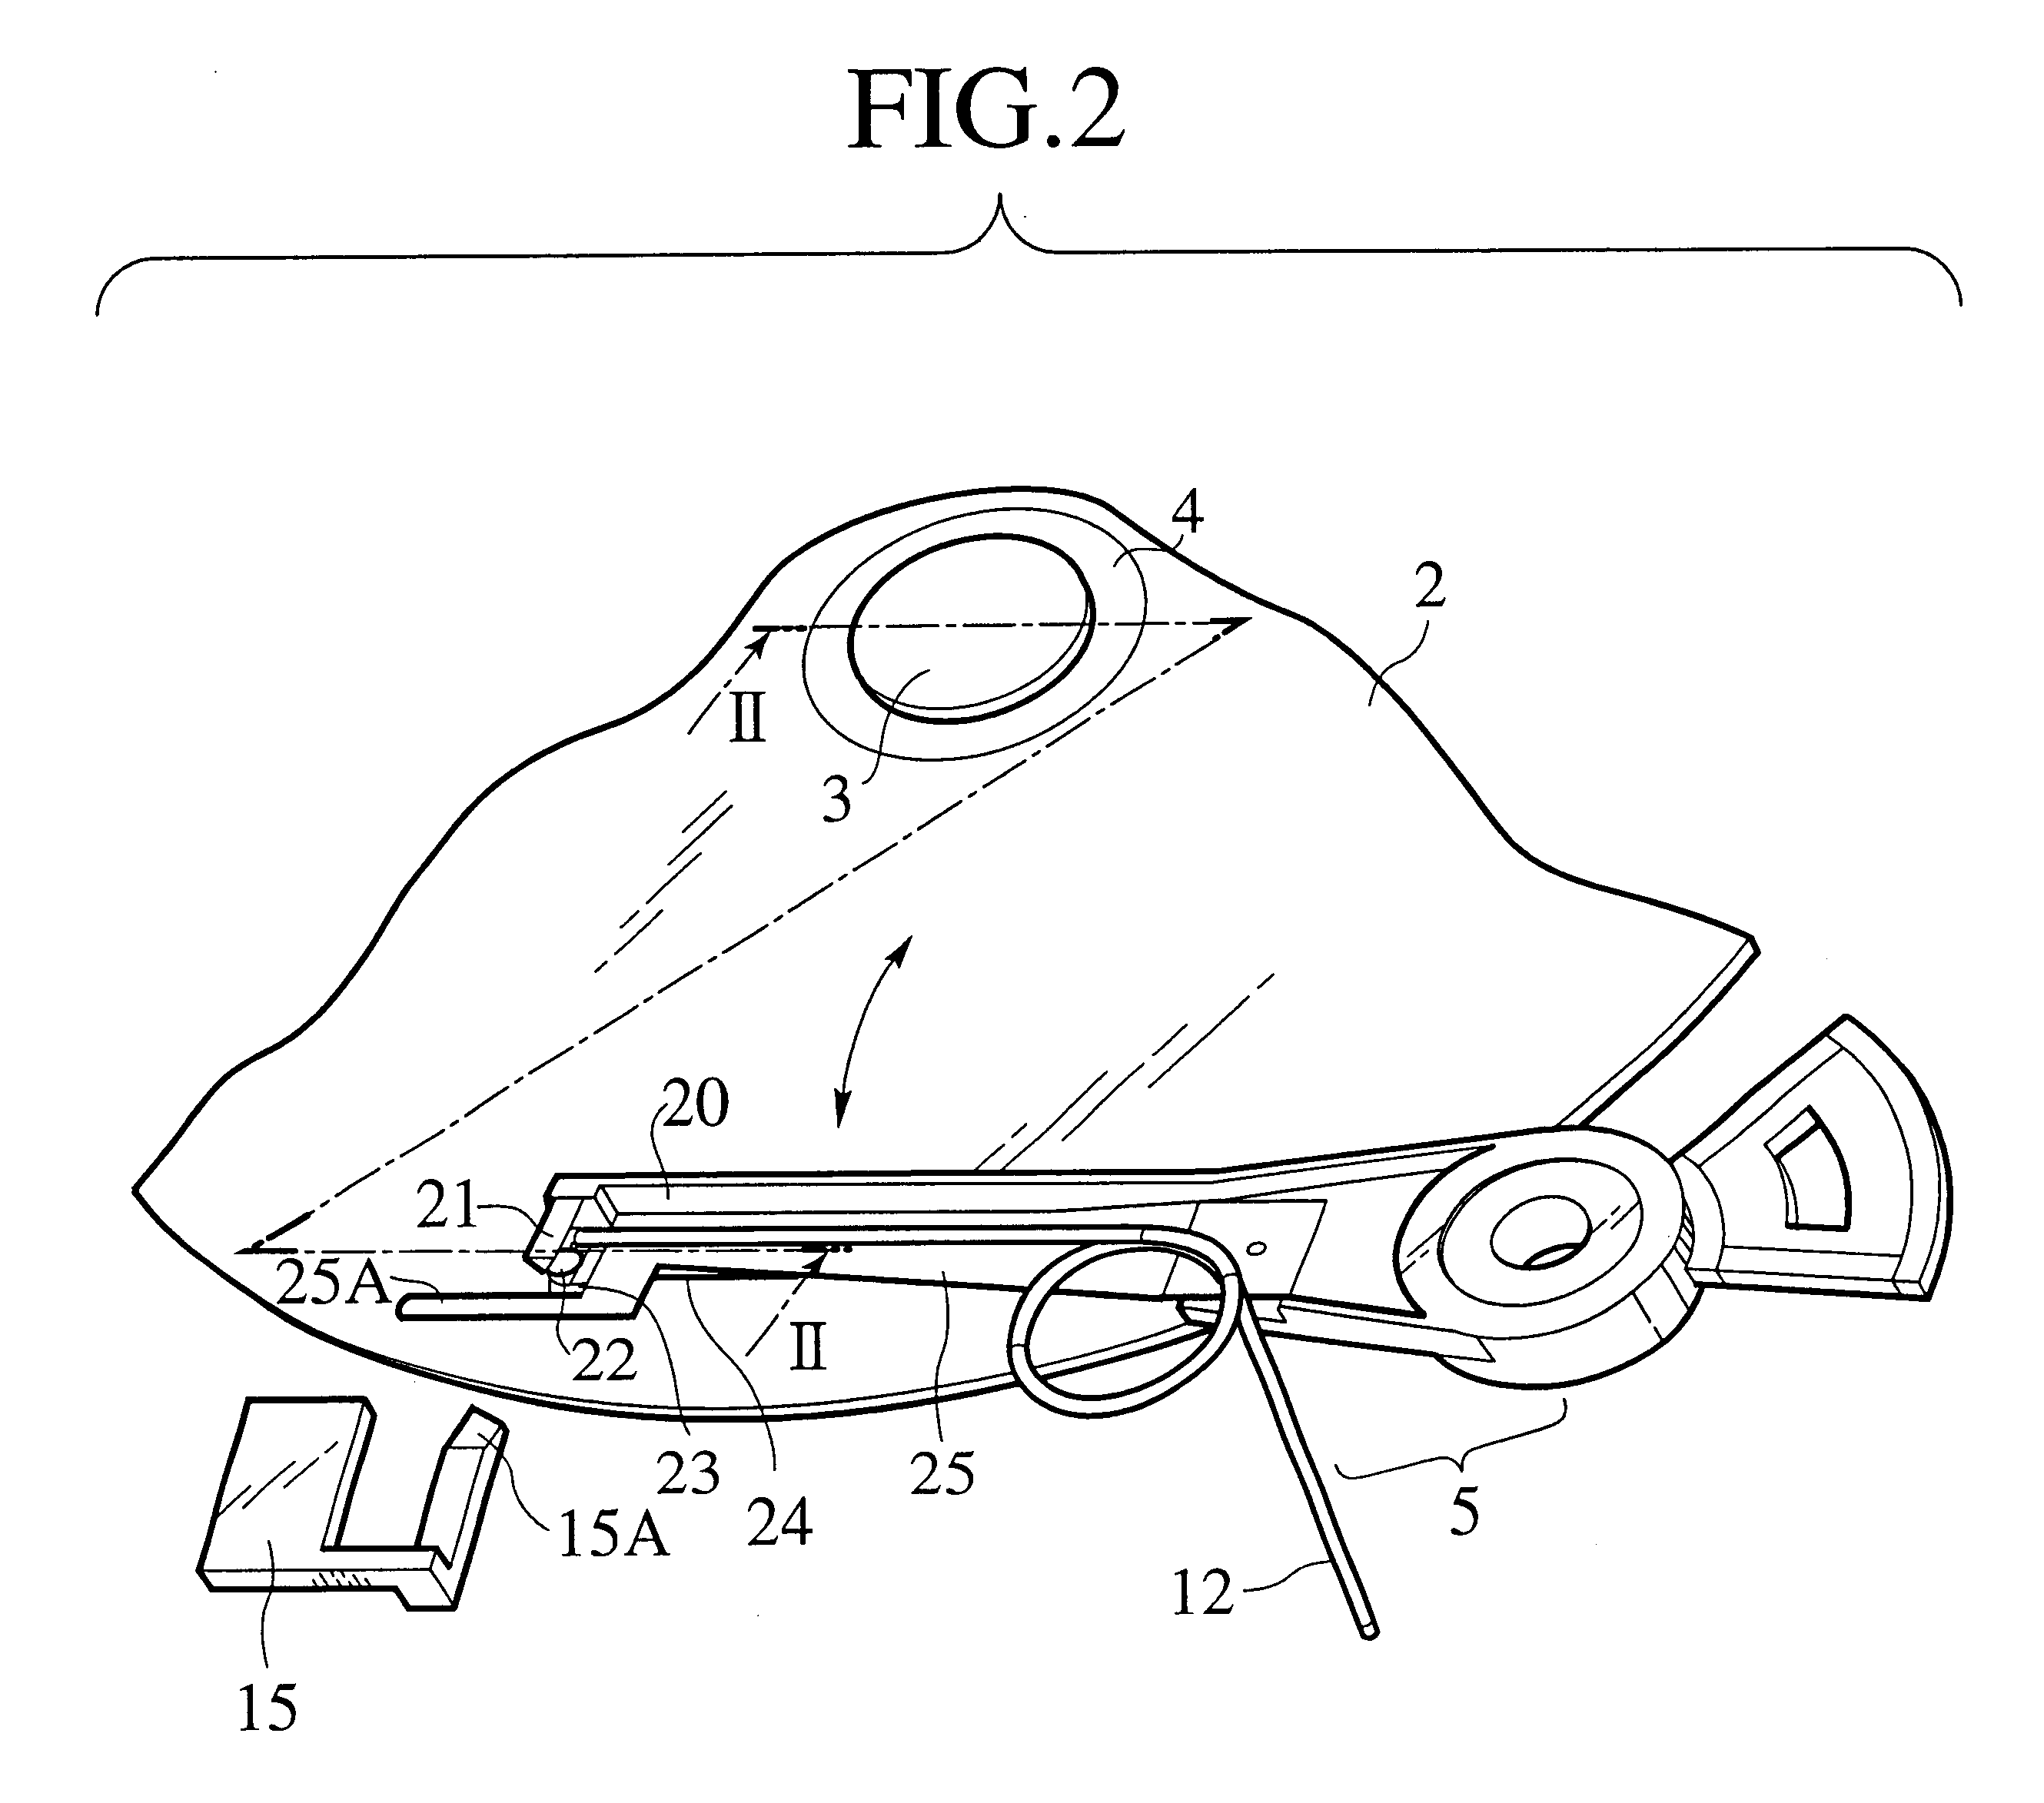 Disk cartridge, optical disk drive, optical library and optical storage system